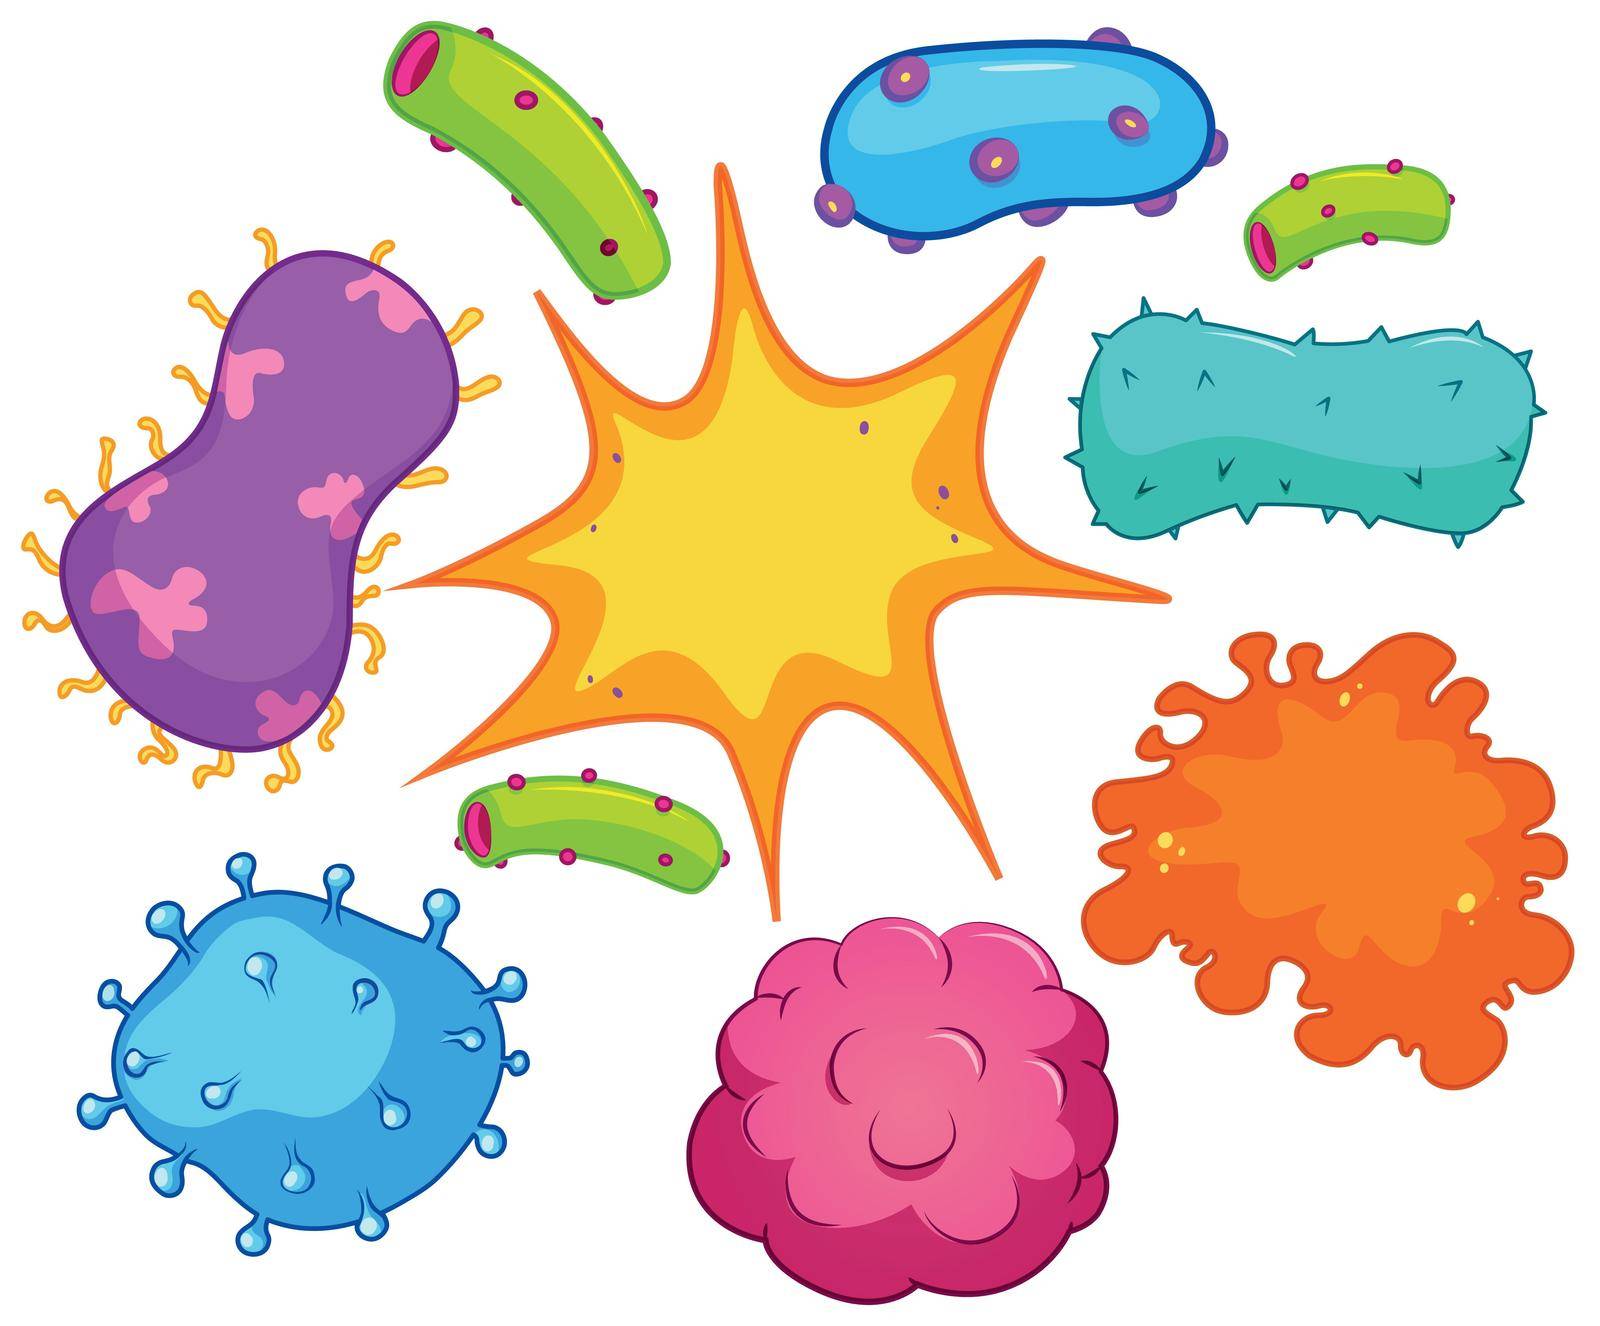 Different shapes of bacteria illustration